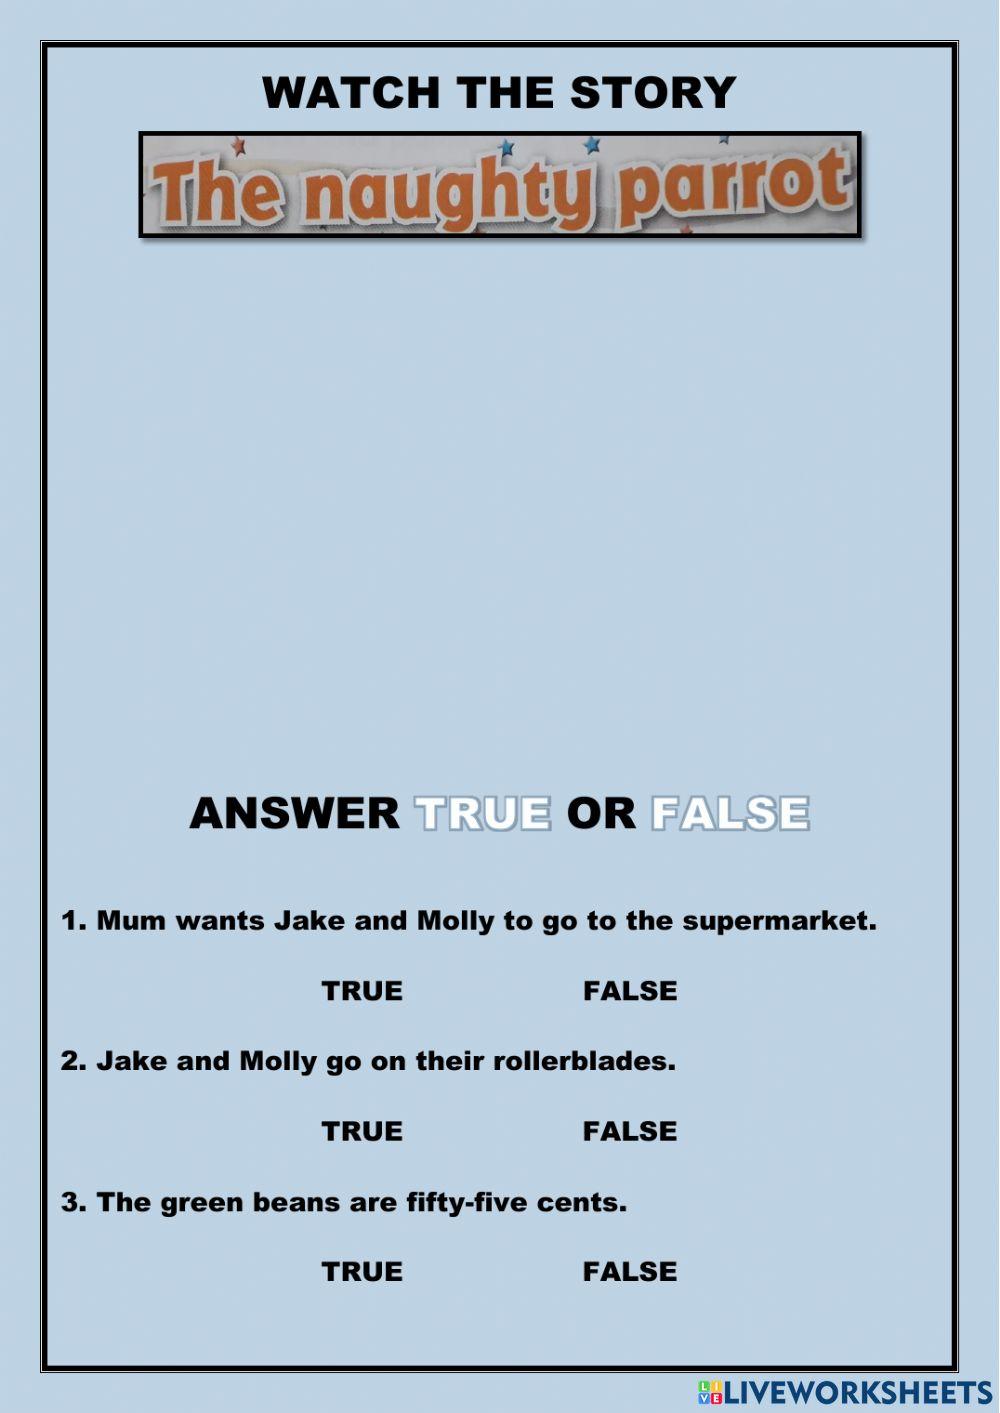 Watch the video. Answer true or false